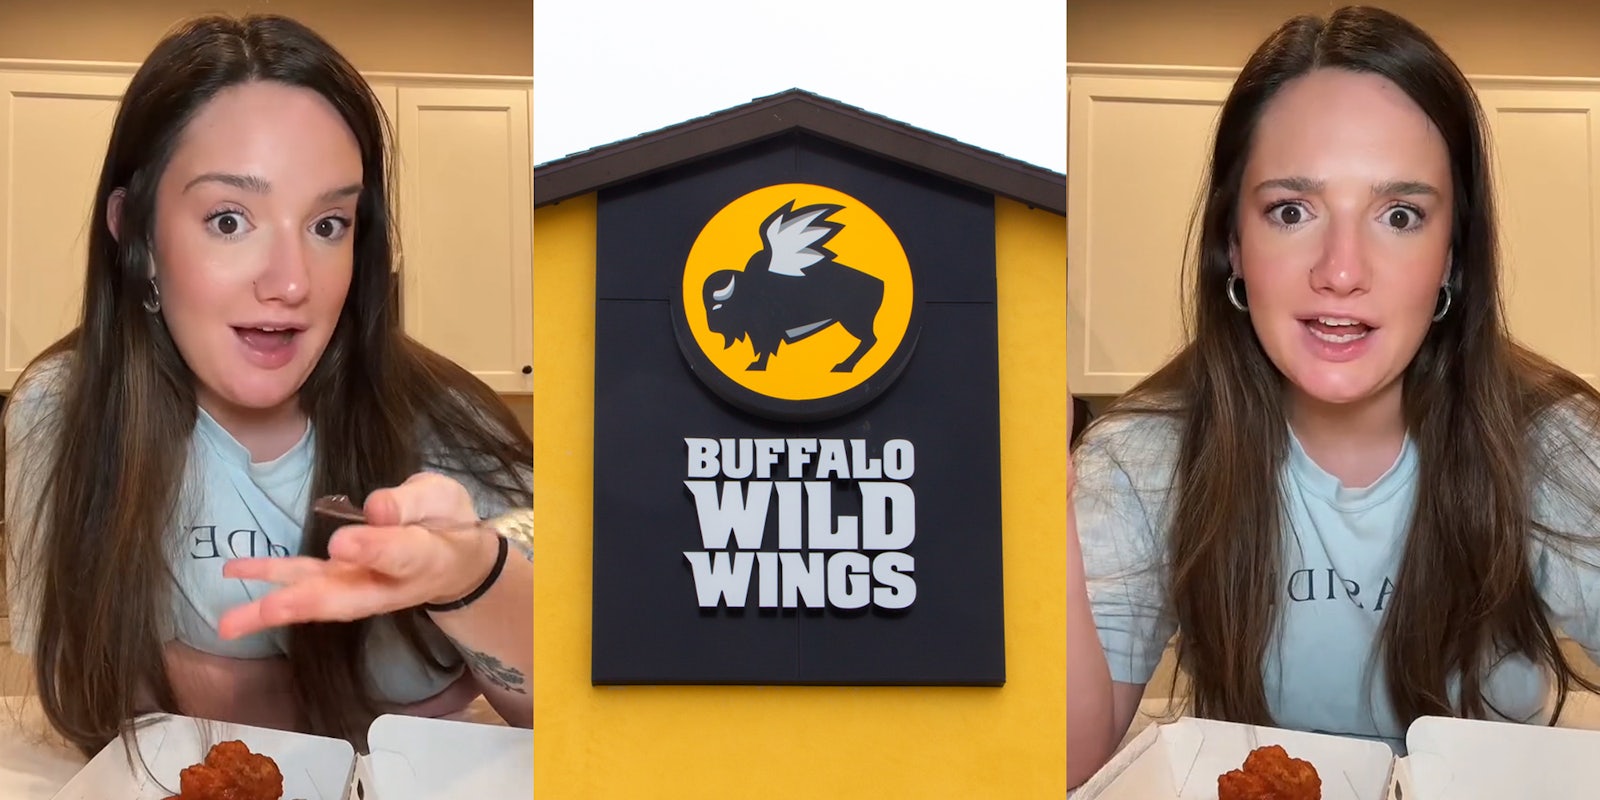 woman speaking while eating hot wings in front of tan walls in kitchen (l) Buffalo Wild Wings sign on building (c) woman speaking while eating hot wings in front of tan walls in kitchen (r)